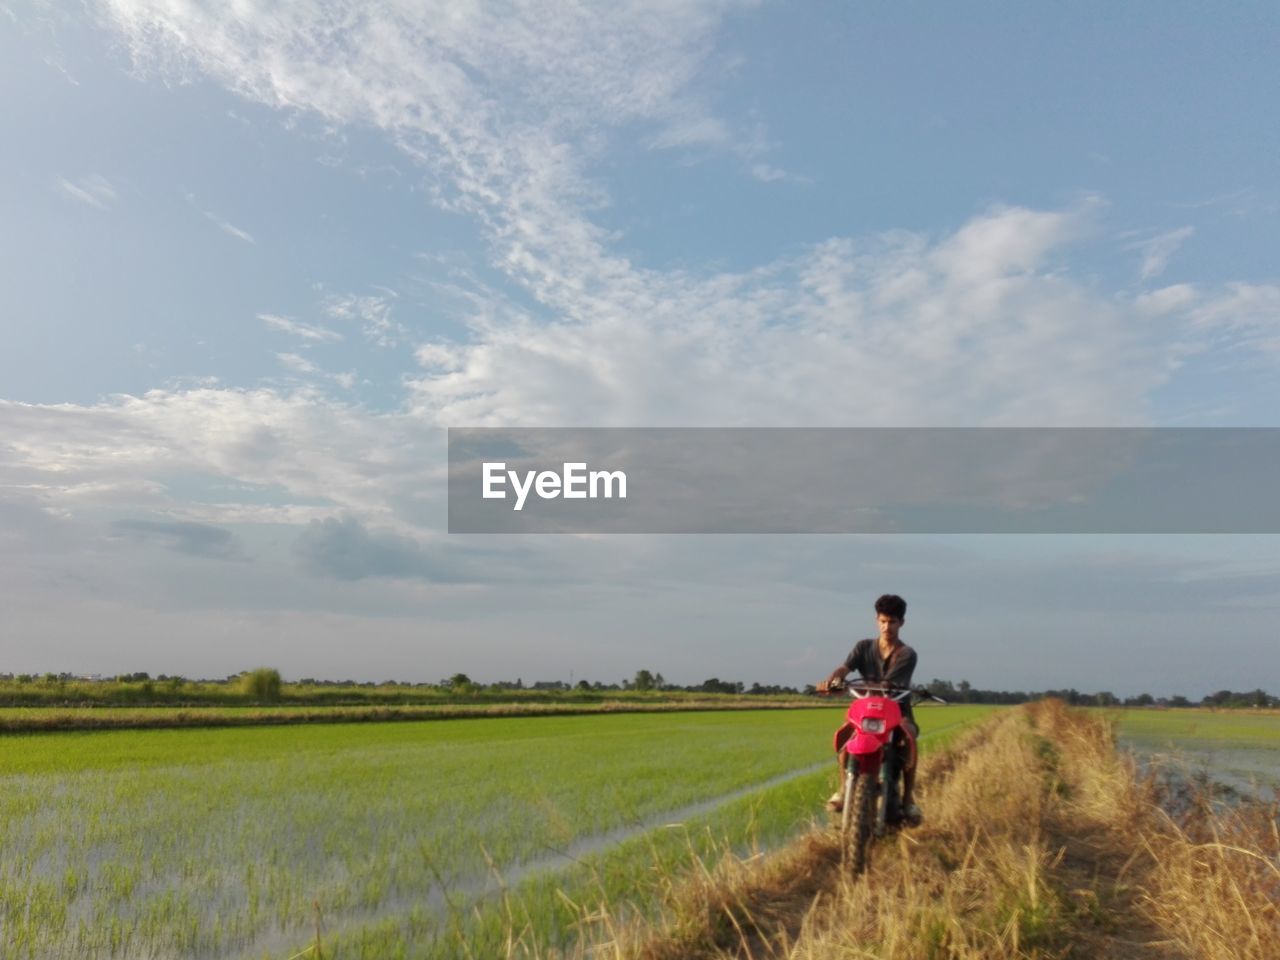 sky, landscape, prairie, rural area, field, grassland, environment, rural scene, agriculture, nature, land, cloud, adult, plant, one person, horizon, plain, meadow, grass, transportation, beauty in nature, steppe, day, motion, hill, women, full length, crop, scenics - nature, copy space, bicycle, cereal plant, natural environment, outdoors, activity, lifestyles, farm, leisure activity, travel, on the move, walking, rear view, cycling, tranquility, non-urban scene, road, sports, mature adult, men, vehicle, sunlight, growth, riding, paddy field, female